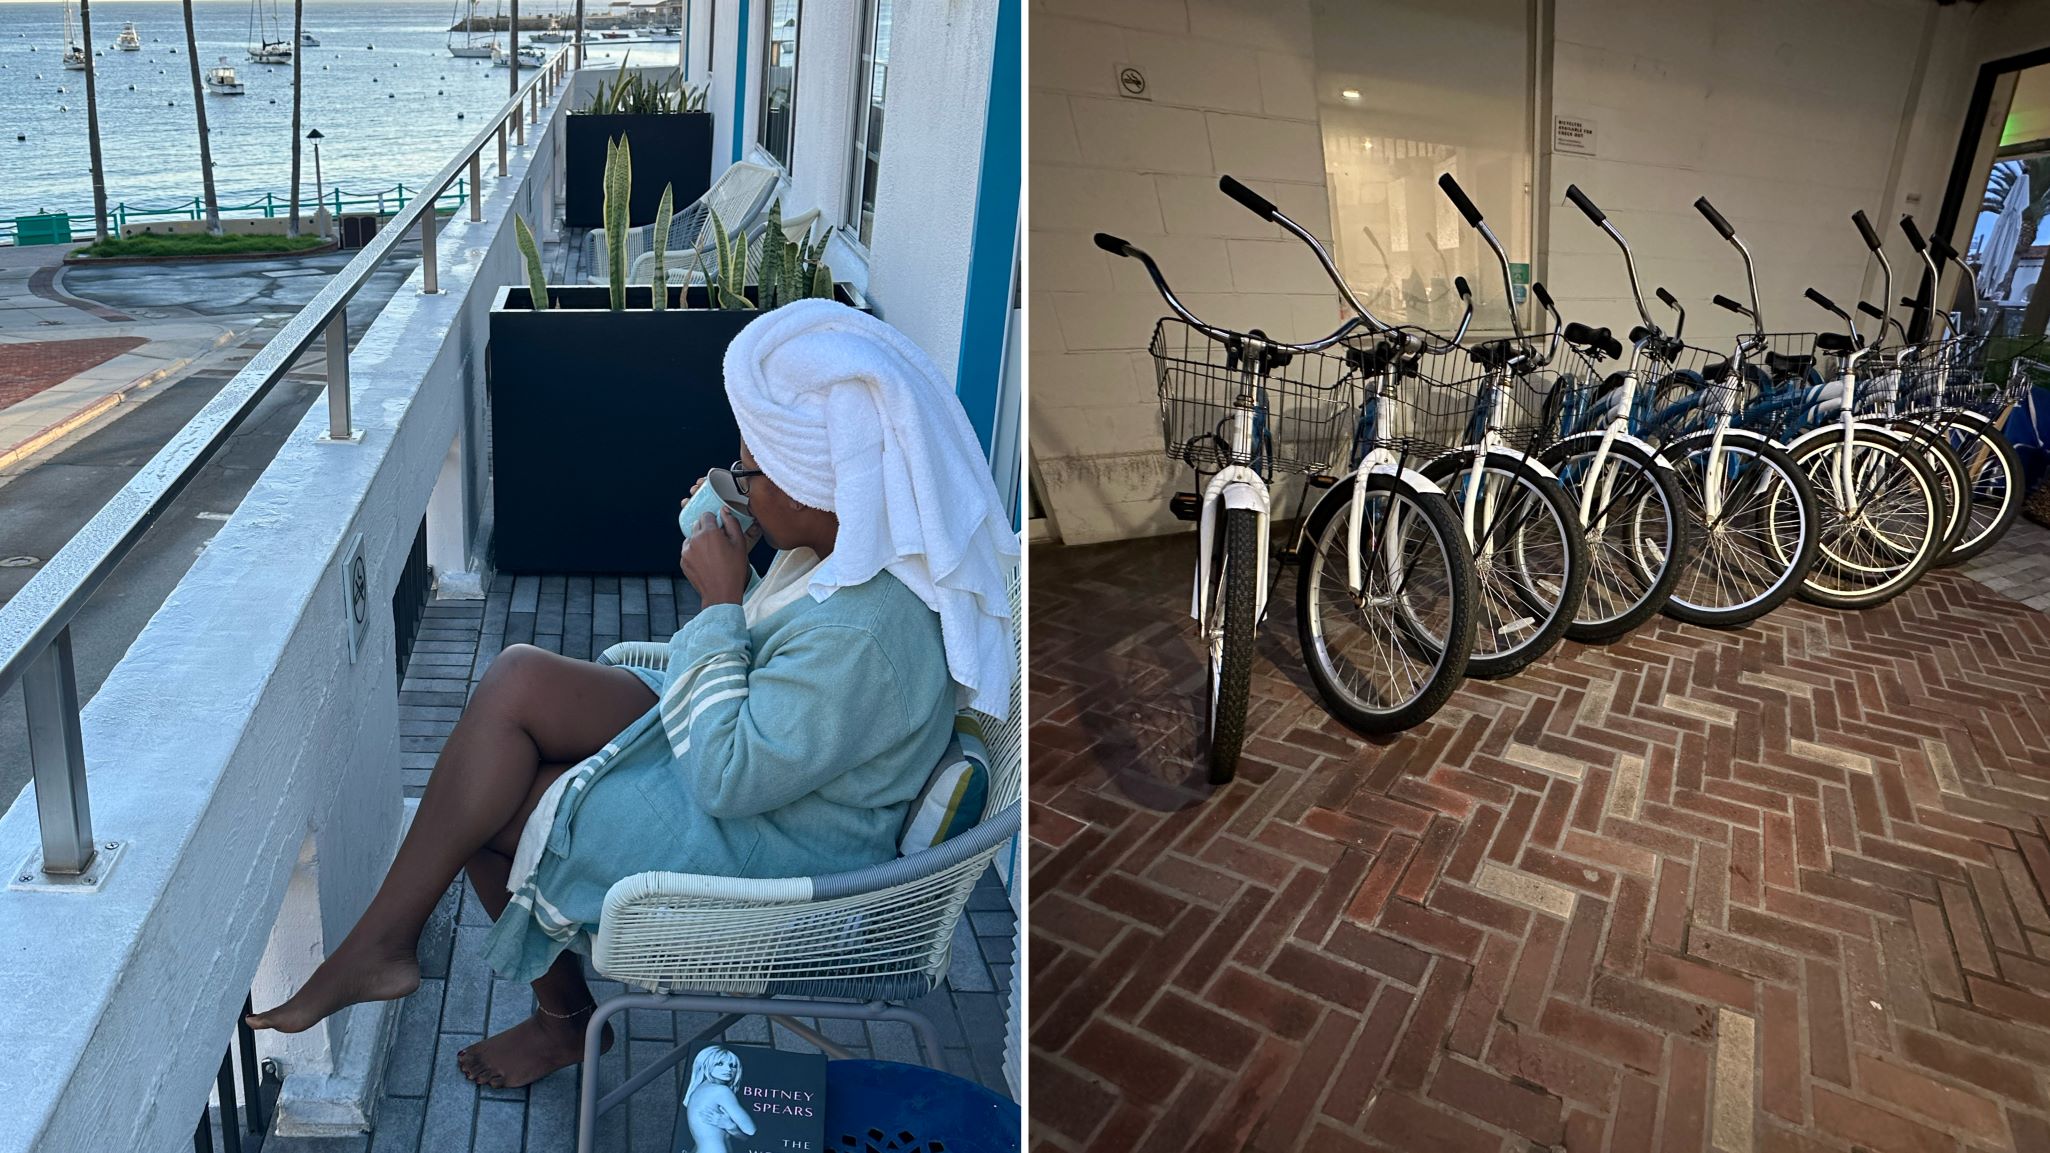 An image of Ariel sipping coffee on the balcony of the Bellanca Hotel, next to a photo of the complimentary bikes.